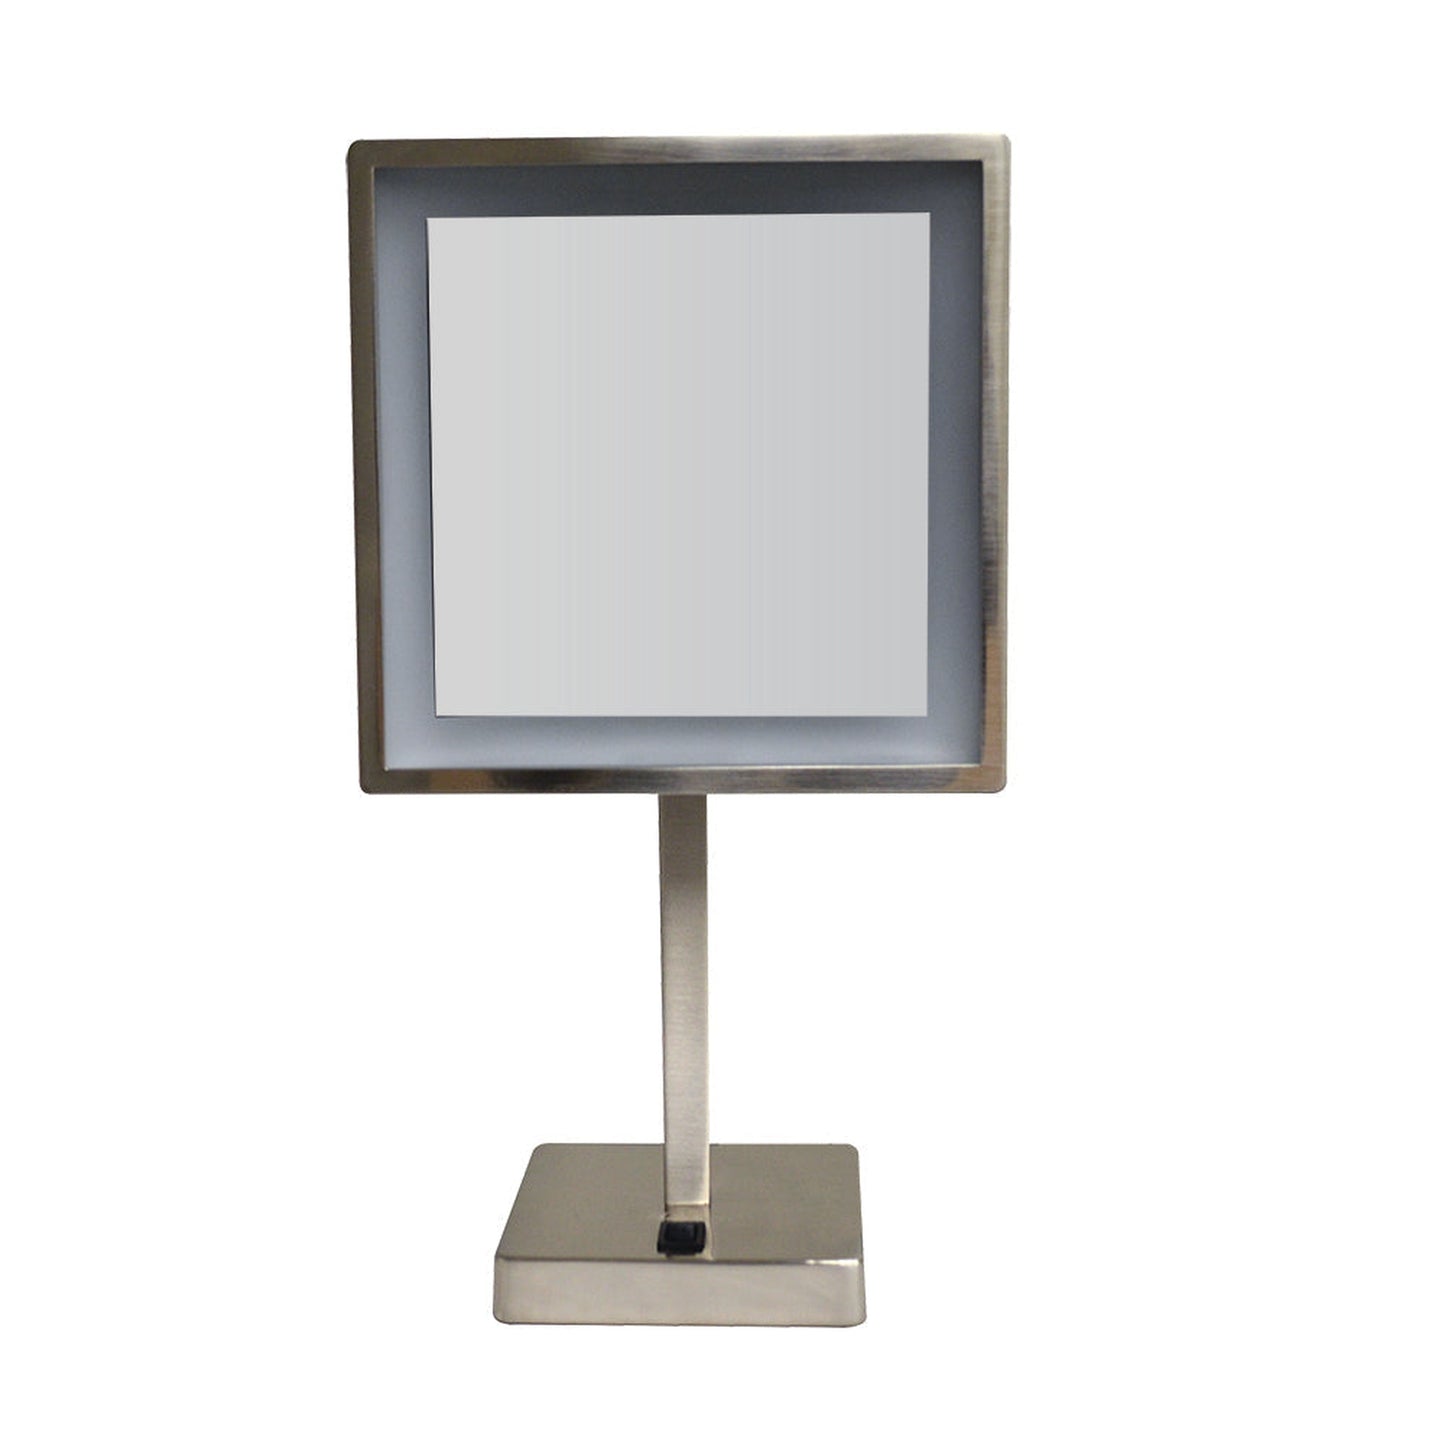 Whitehaus WHMR295-BN Brushed Nickel Square Freestanding Led 5X Magnified Mirror